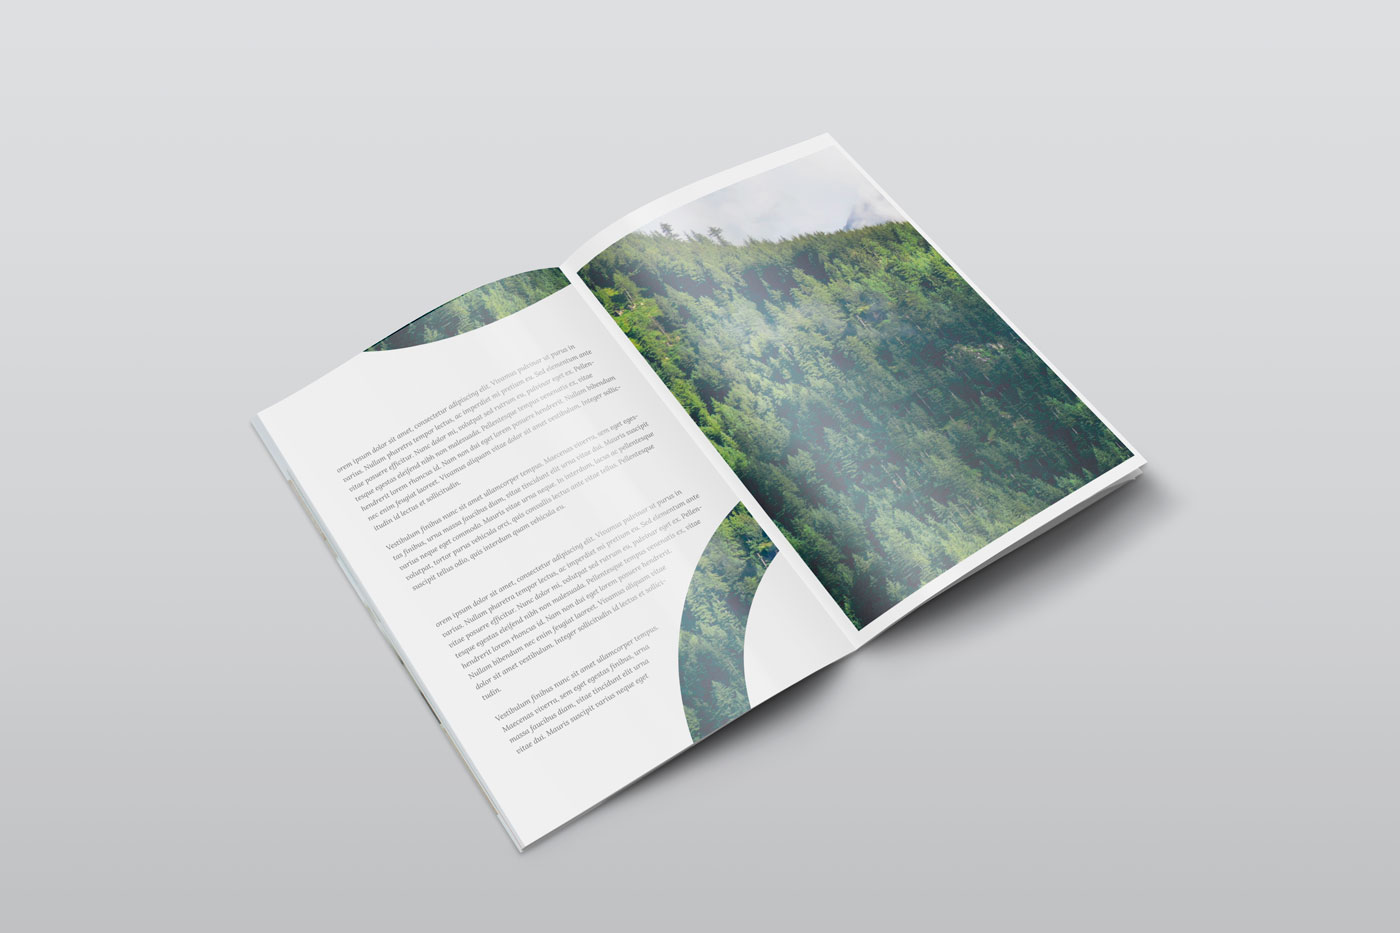 Download Free Isometric A4 Psd Magazine Mockup By Mats Peter Forss On Dribbble Yellowimages Mockups